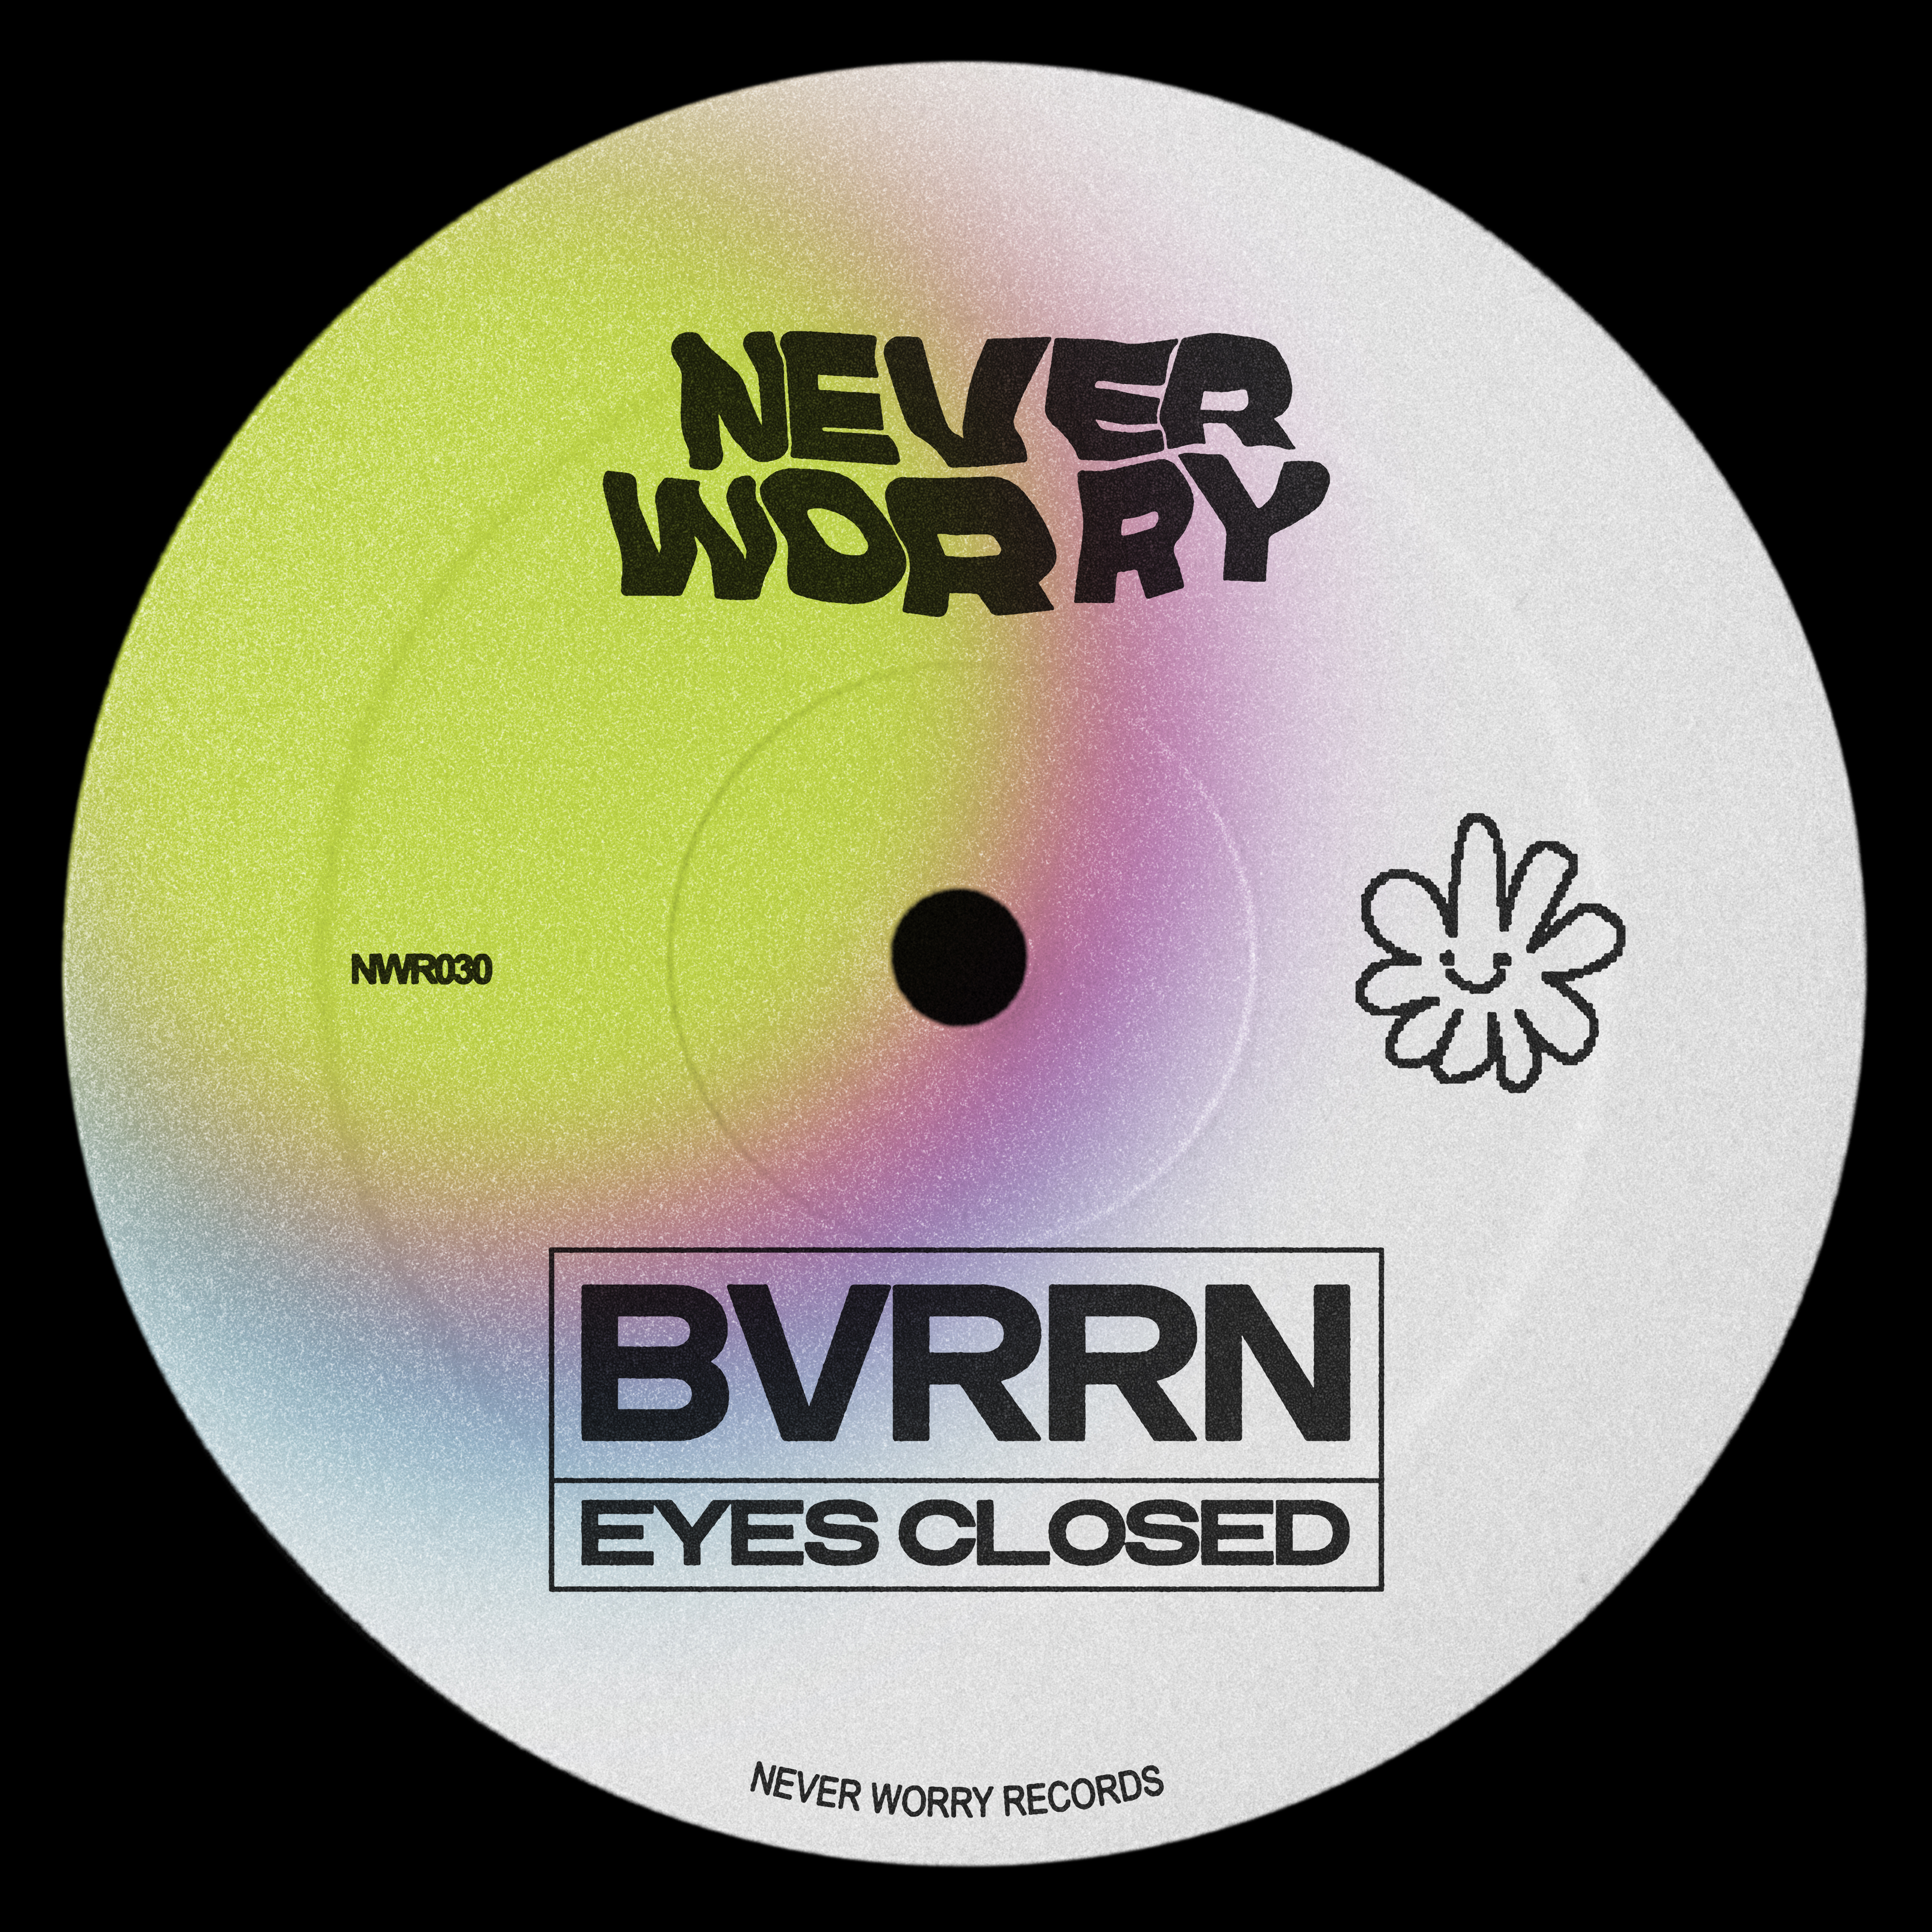 BVRRN And Never Worry Records Connect On “Eyes Closed”